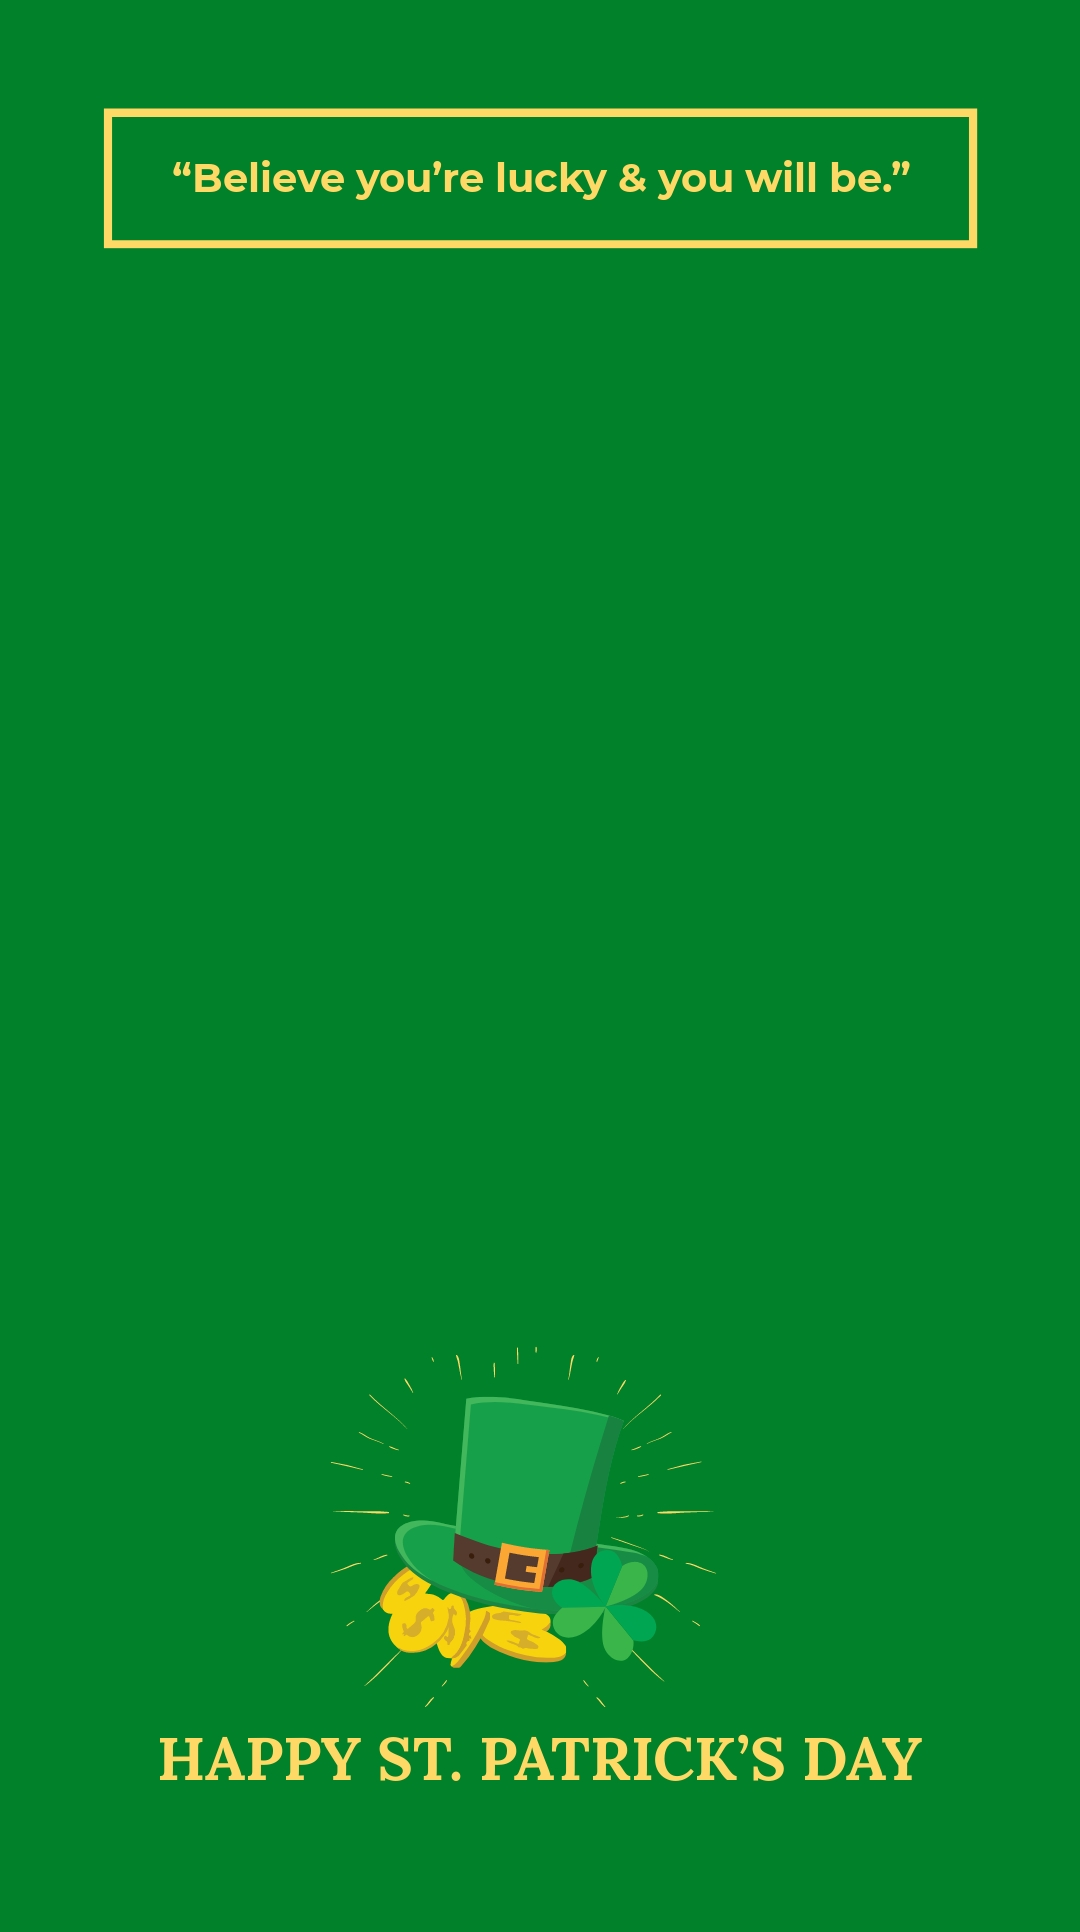 St. Patricks Day Quote Snapchat Geofilter Template